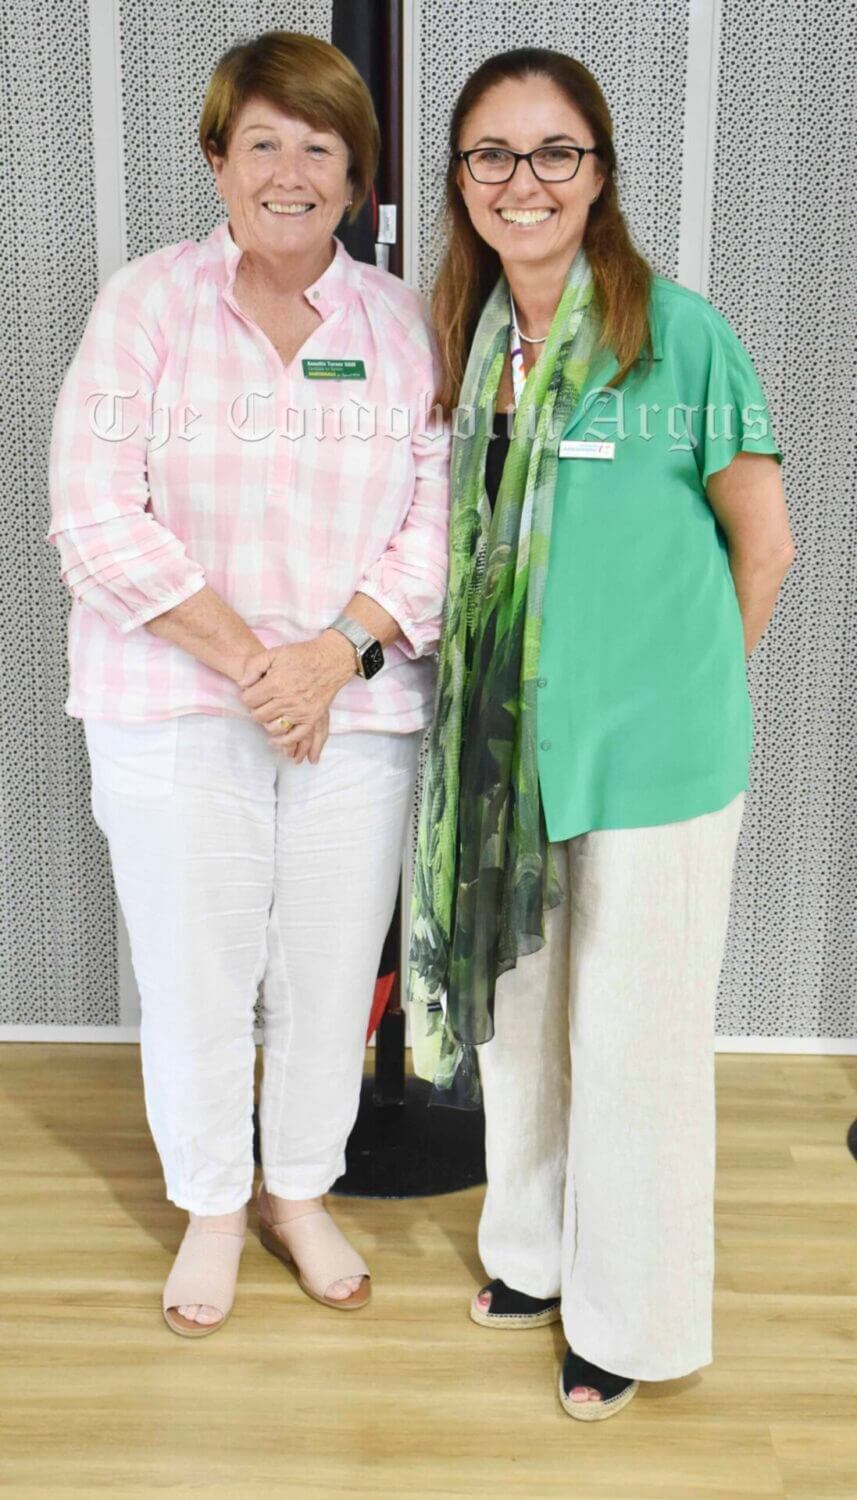 The Nationals Candidate for the NSW Seat of Barwon Annette Turner with 2023 Lachlan Shire Australia Day Ambassador Carolyn Mee. Image Credit: Melissa Blewitt.